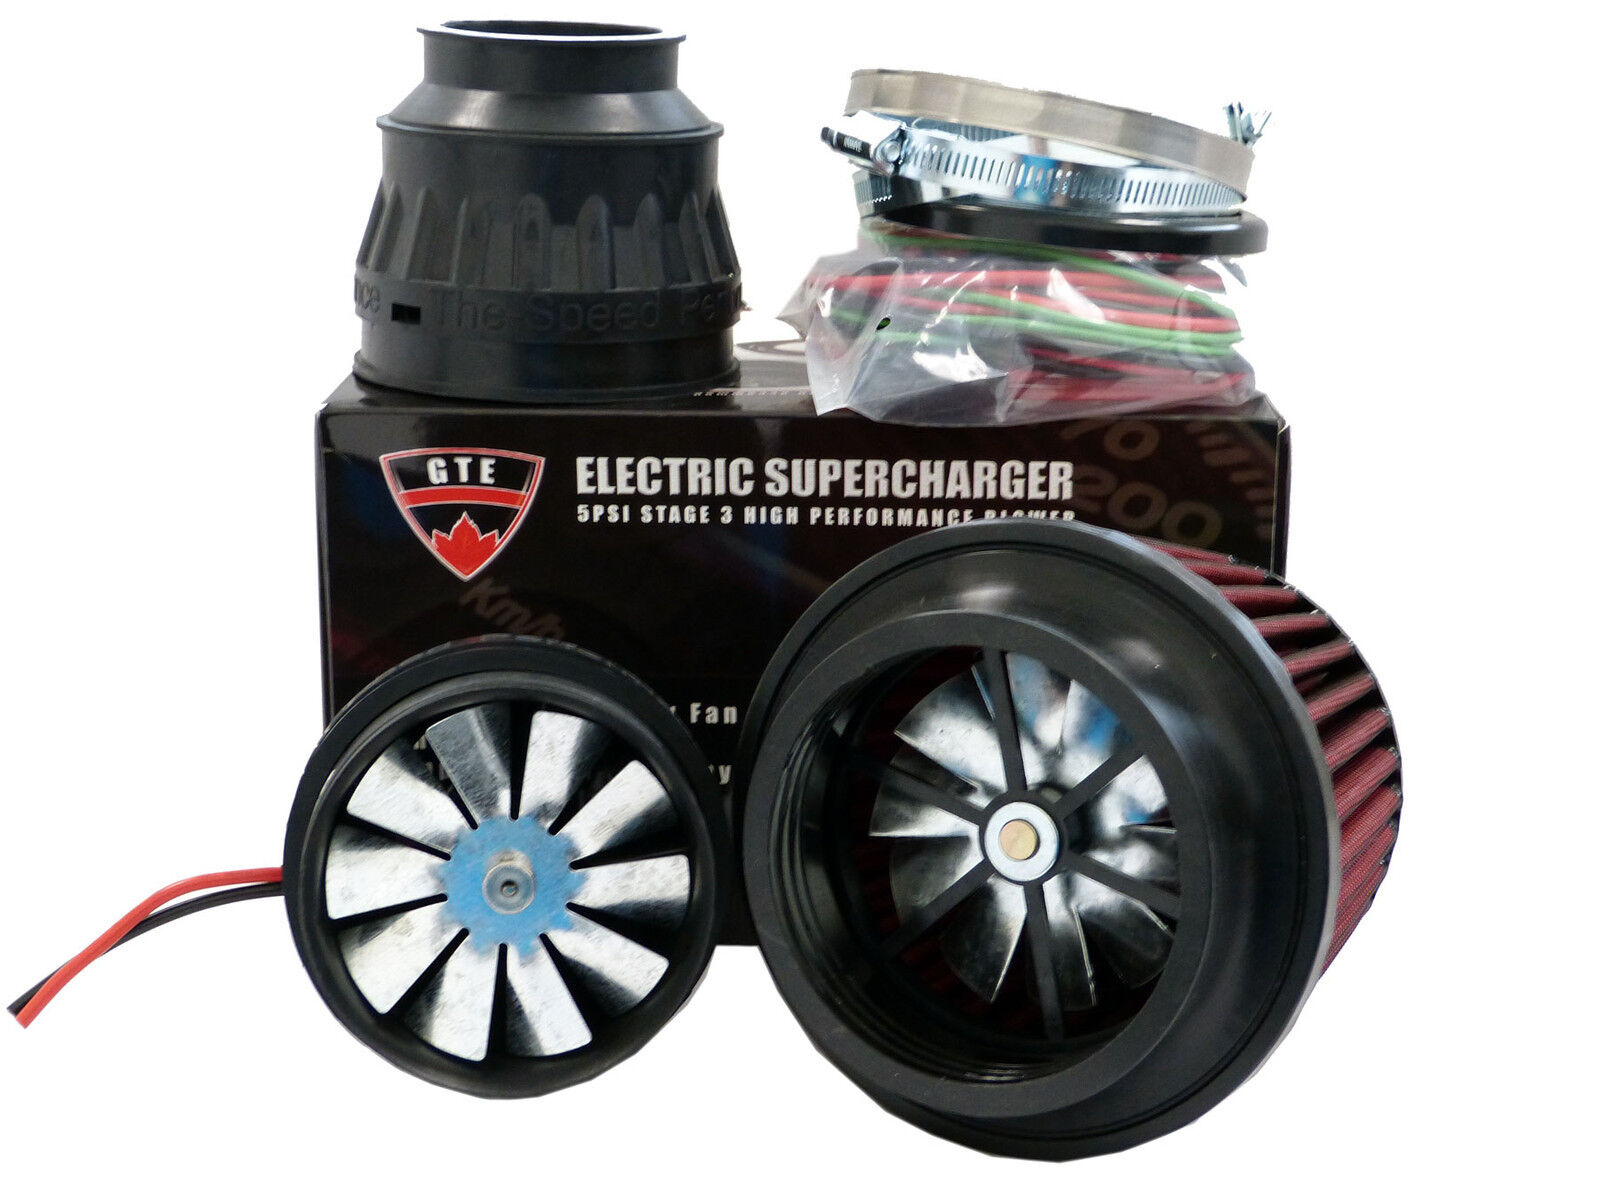 5PSI ELECTRIC SUPERCHARGER TURBO ADD HORSEPOWER + TORQUE INTAKE FOR JEEP